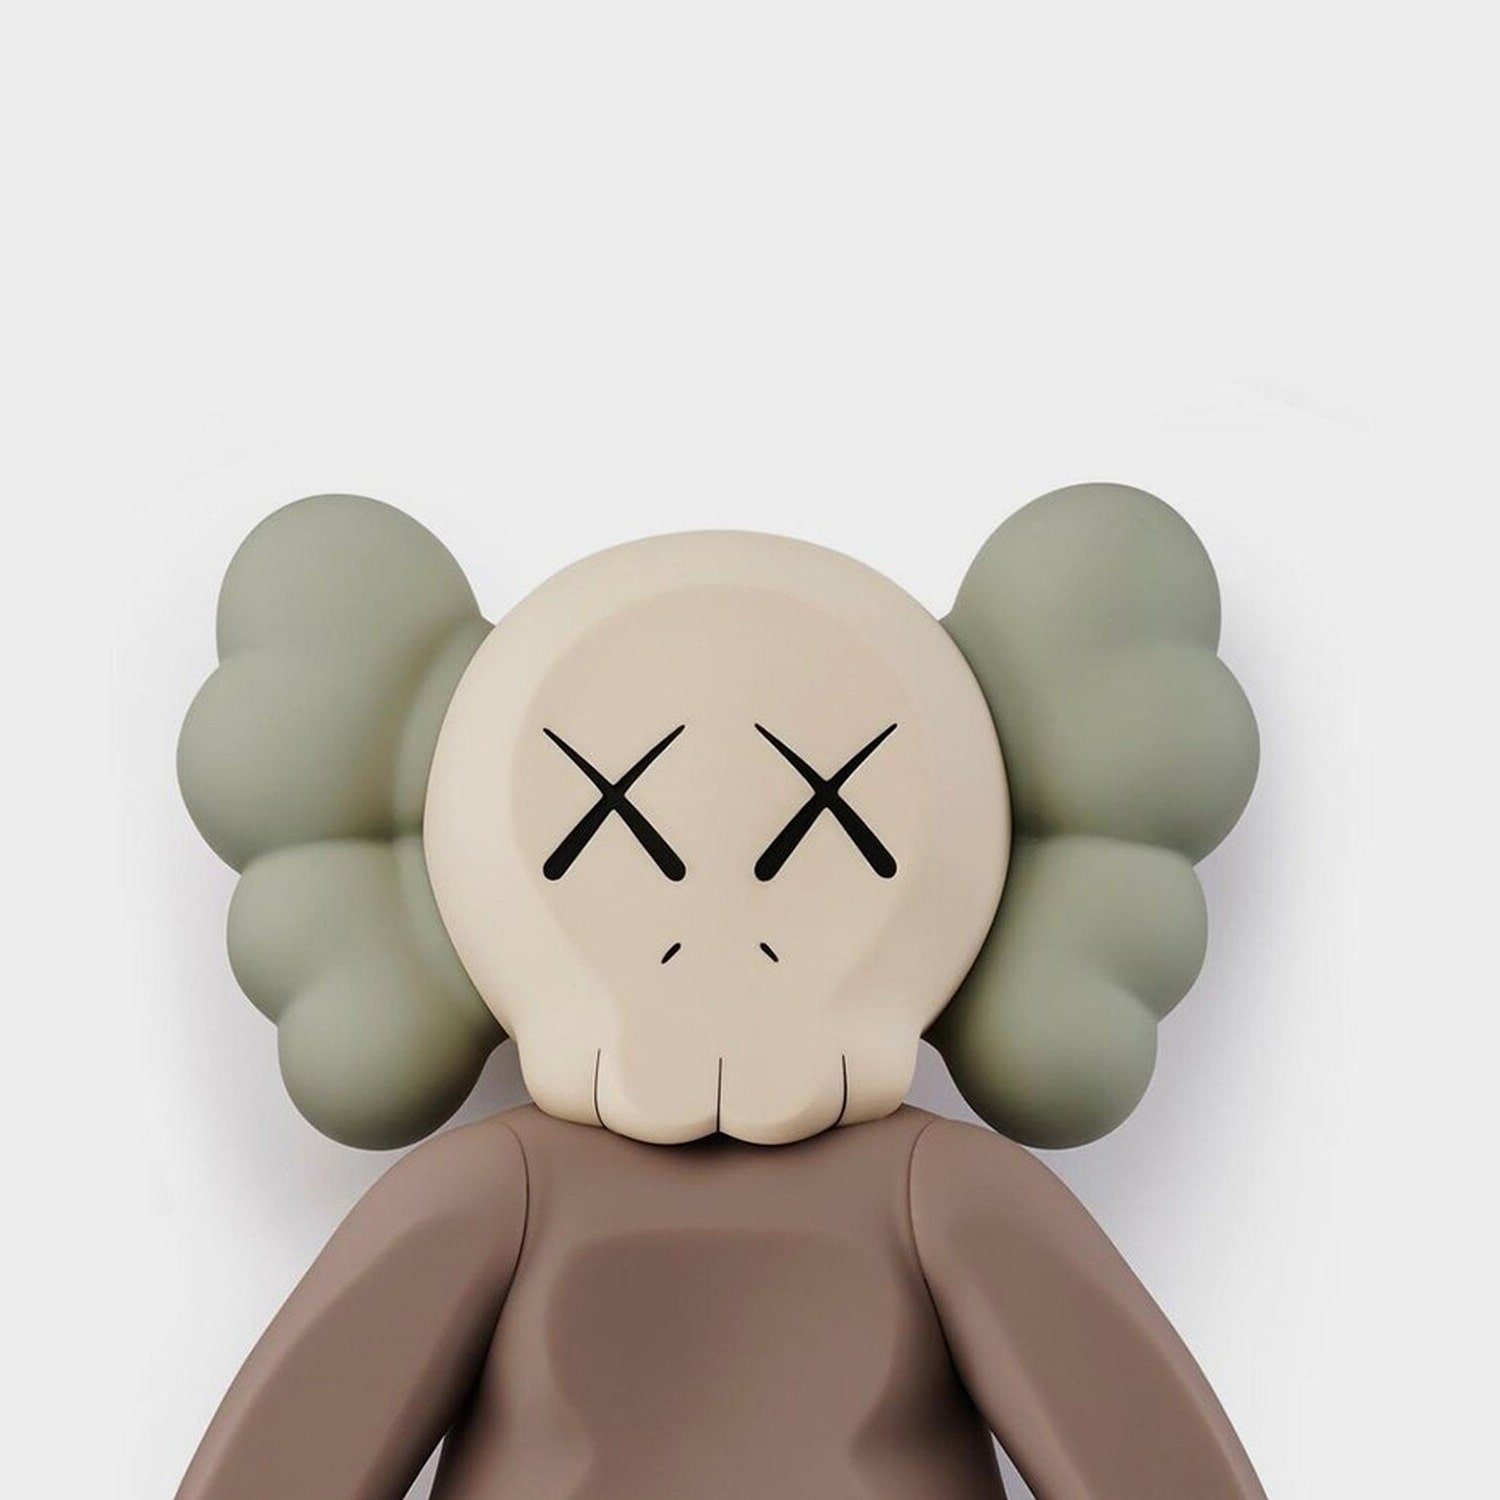 Companion 2020 brown vinyl sculpture by Kaws - Dope! Gallery